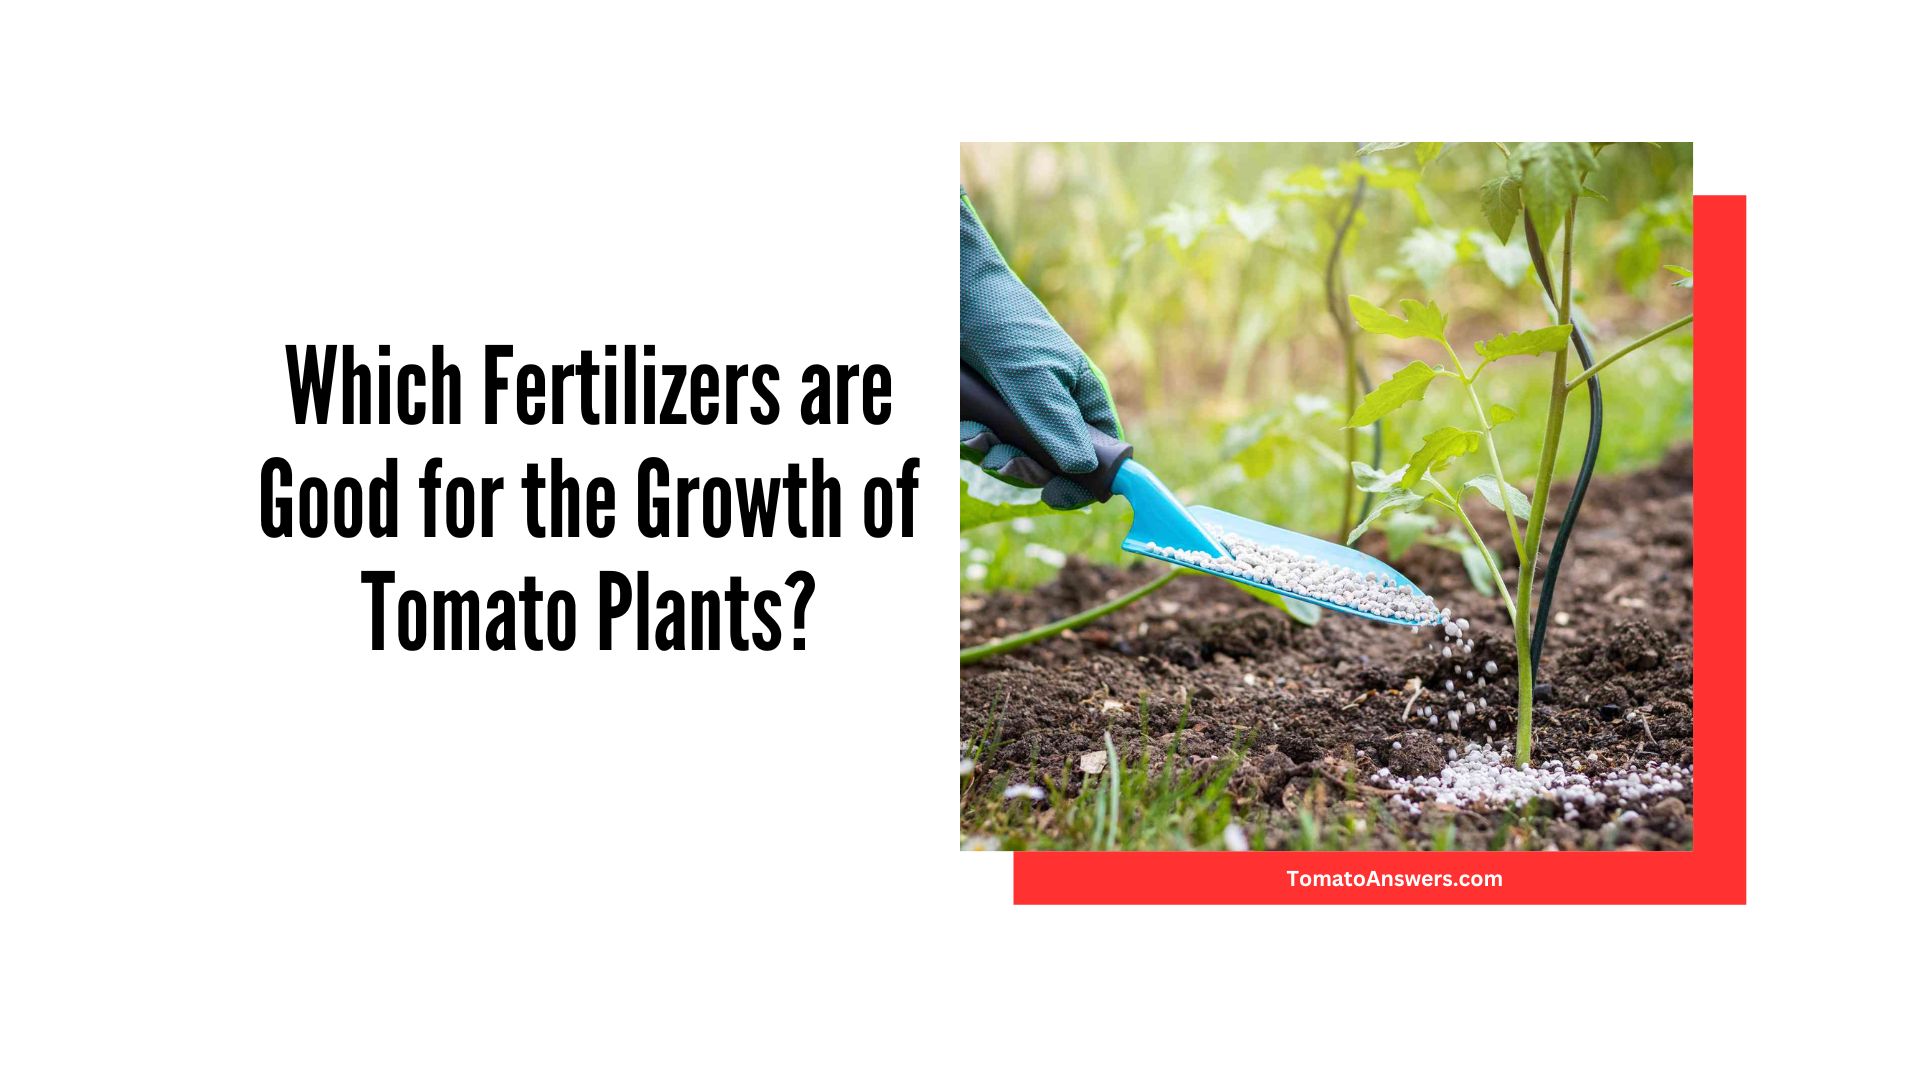 Which Fertilizers are Good for the Growth of Tomato Plants?